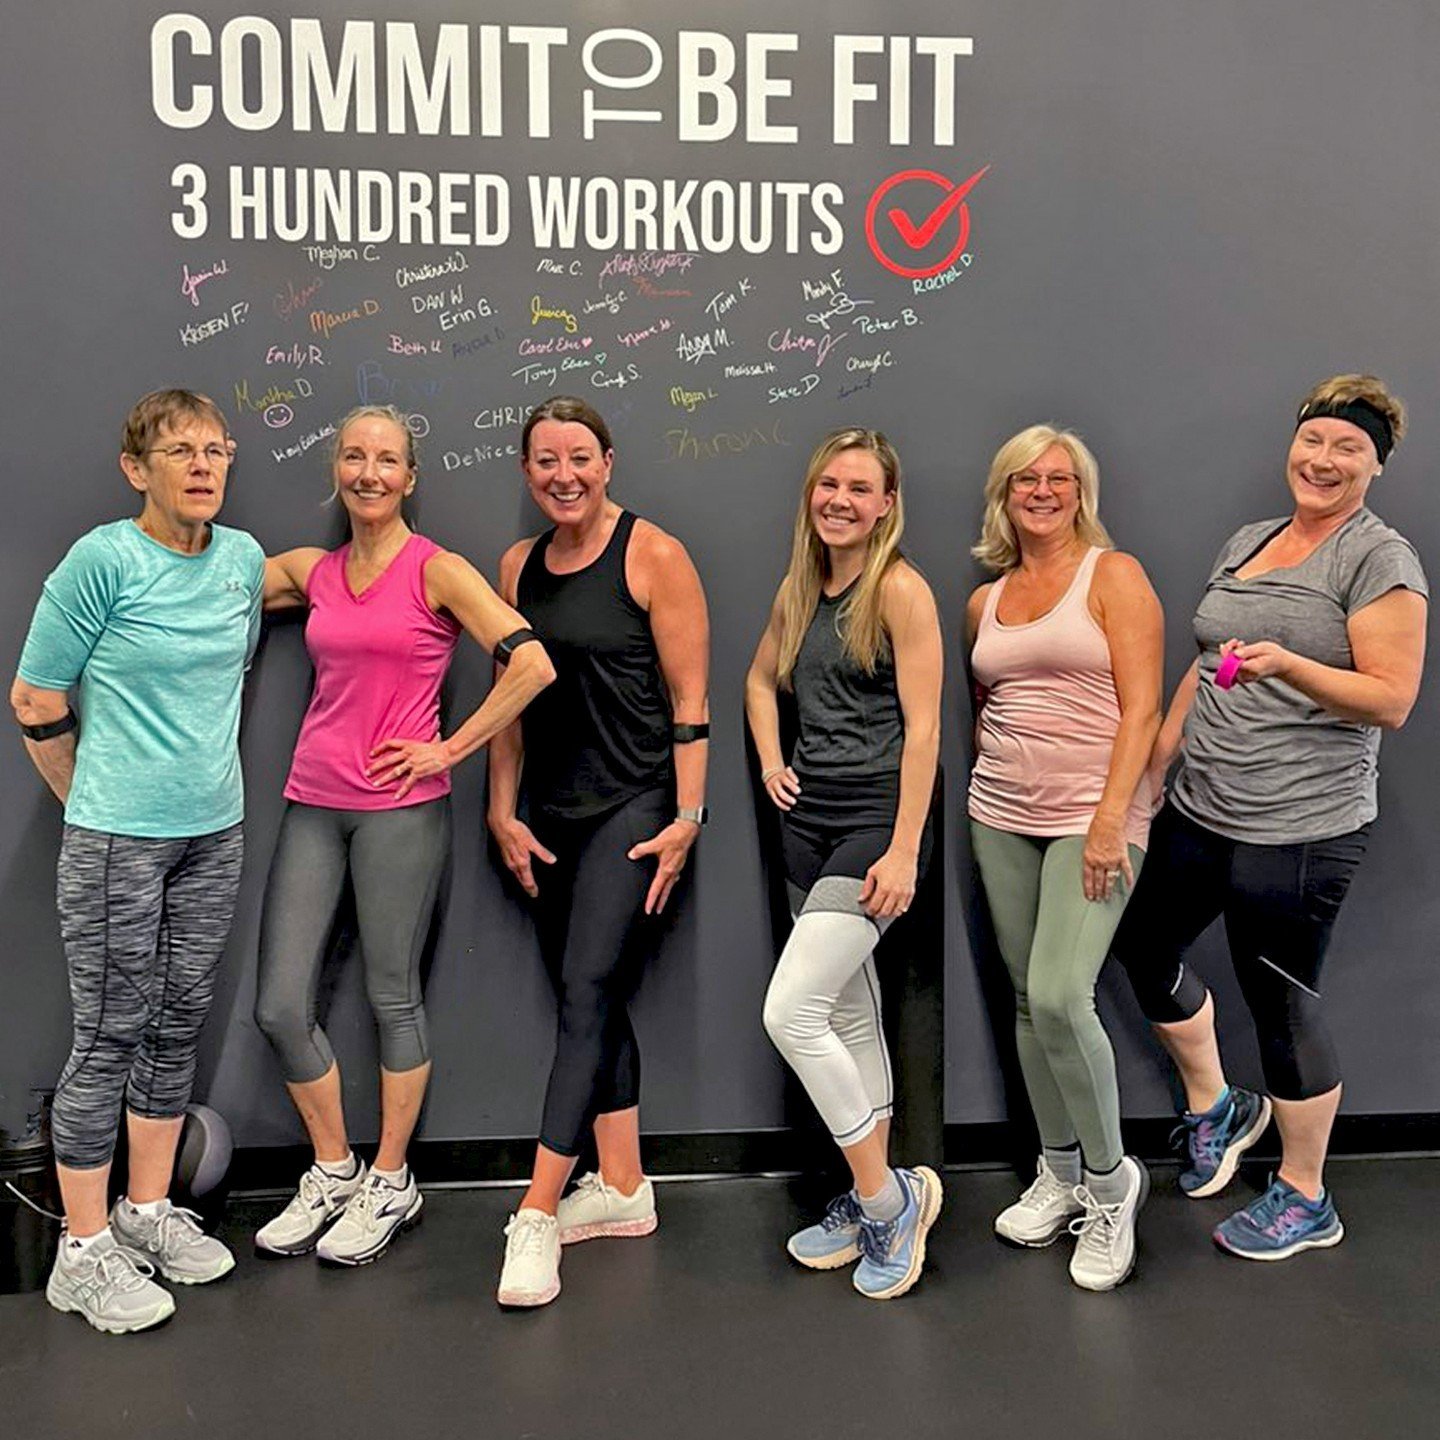 The 5:00pm crew has been bringing the HEAT! 🔥 🔥 We absolutely crushed our workout and left feeling stronger than ever! 💥 💪 High fives to everyone who pushed themselves tonight! 🙌 🤩 
#workoutcomplete #crushyourgoals #strongereveryday #motivatedb